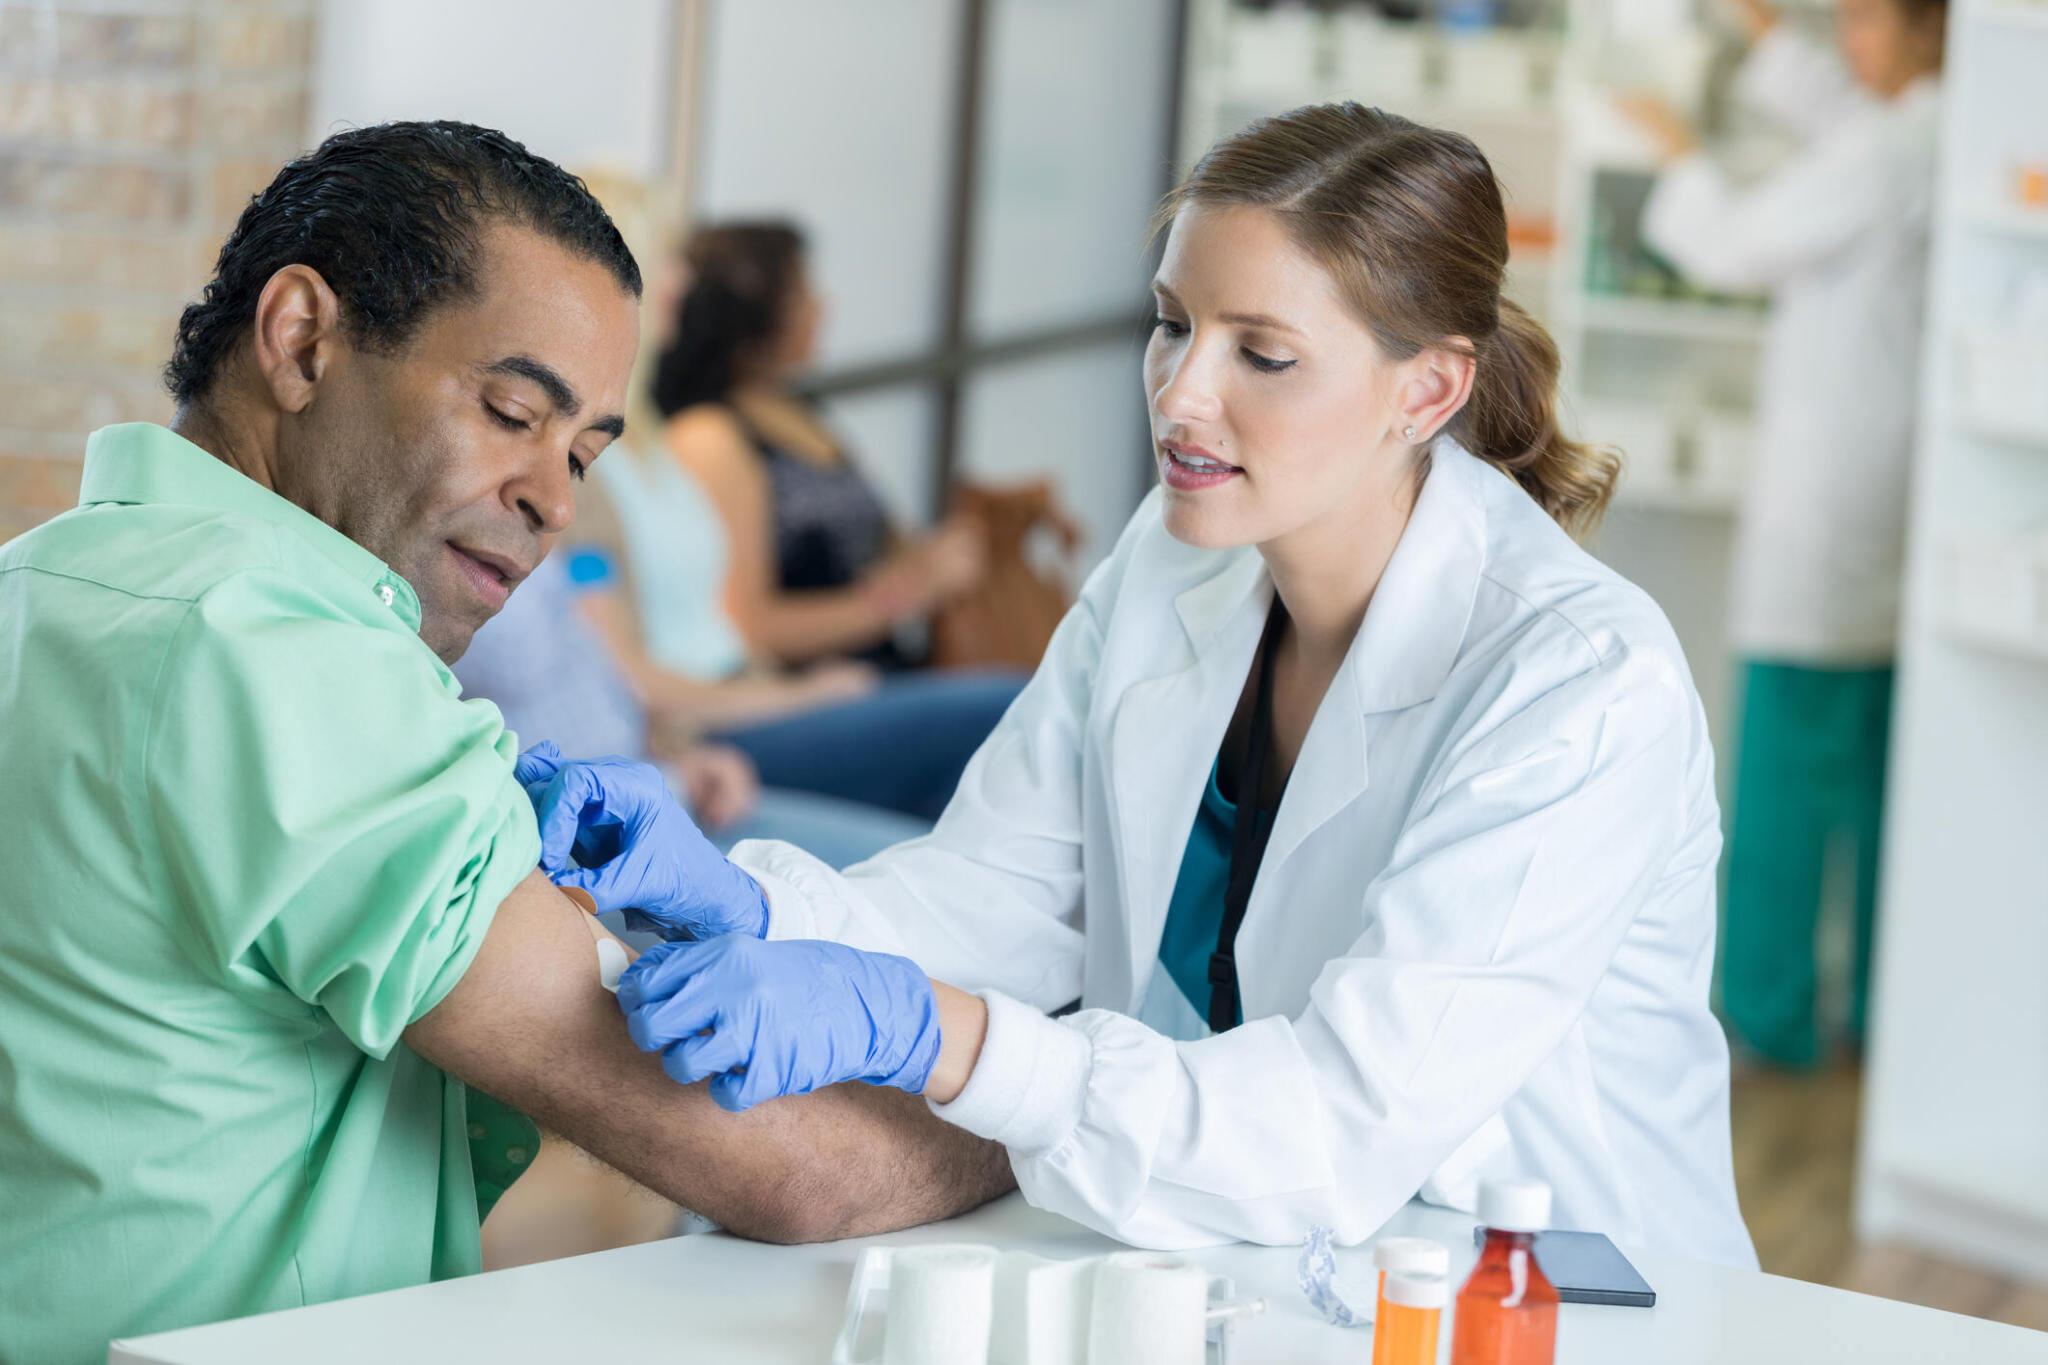 Choosing the Right Urgent Care for Vaccination in Fairfield, CT